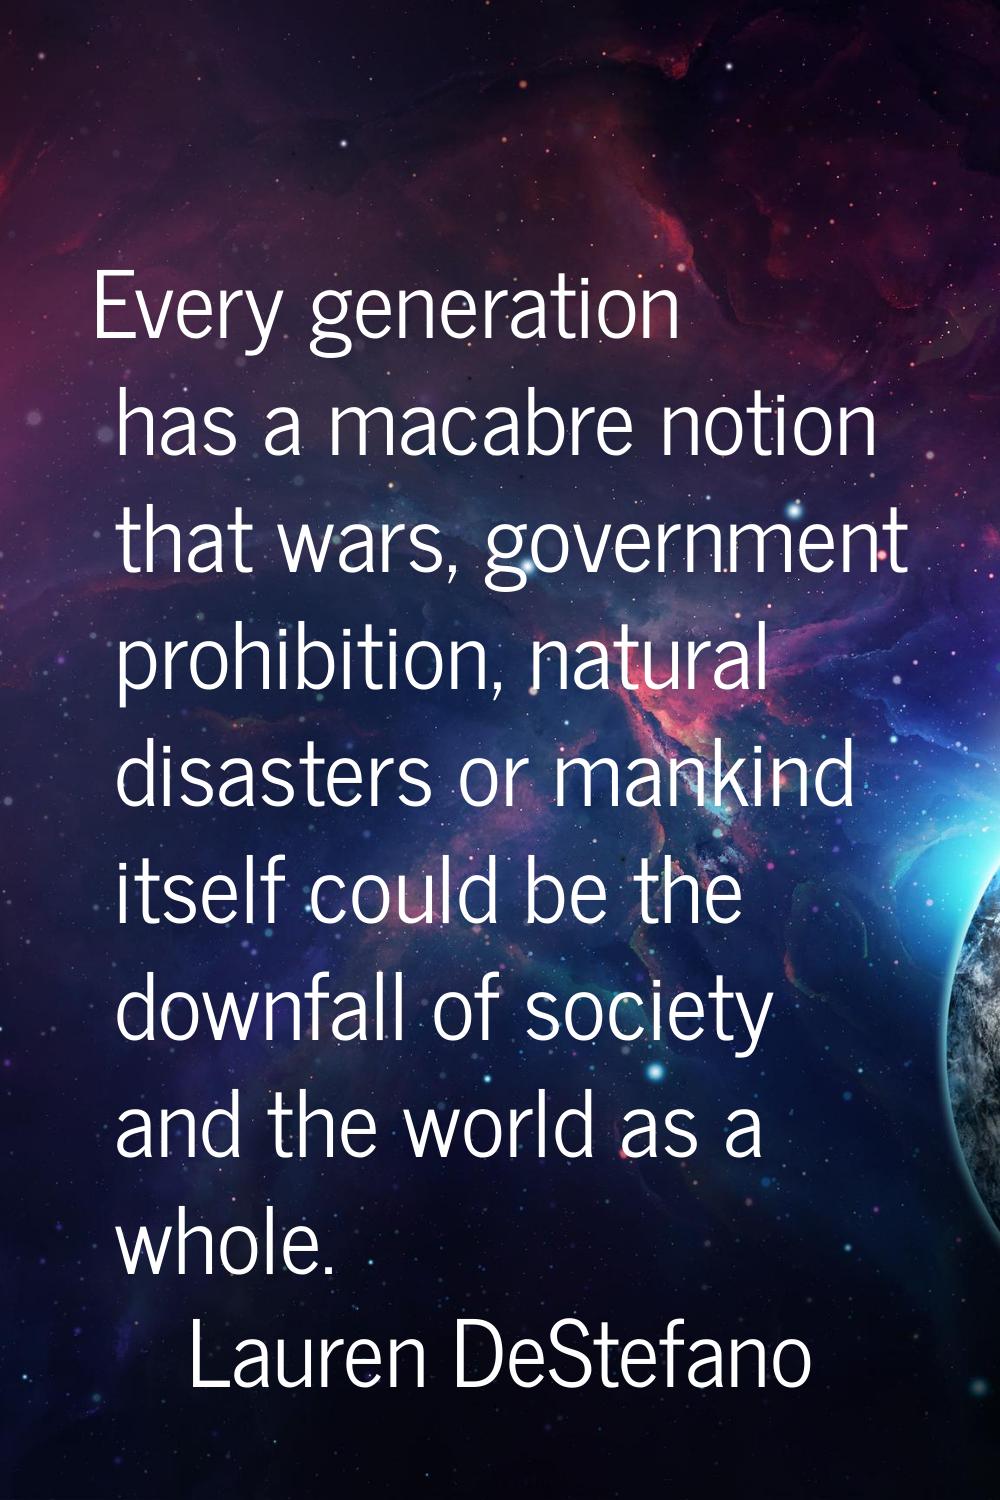 Every generation has a macabre notion that wars, government prohibition, natural disasters or manki